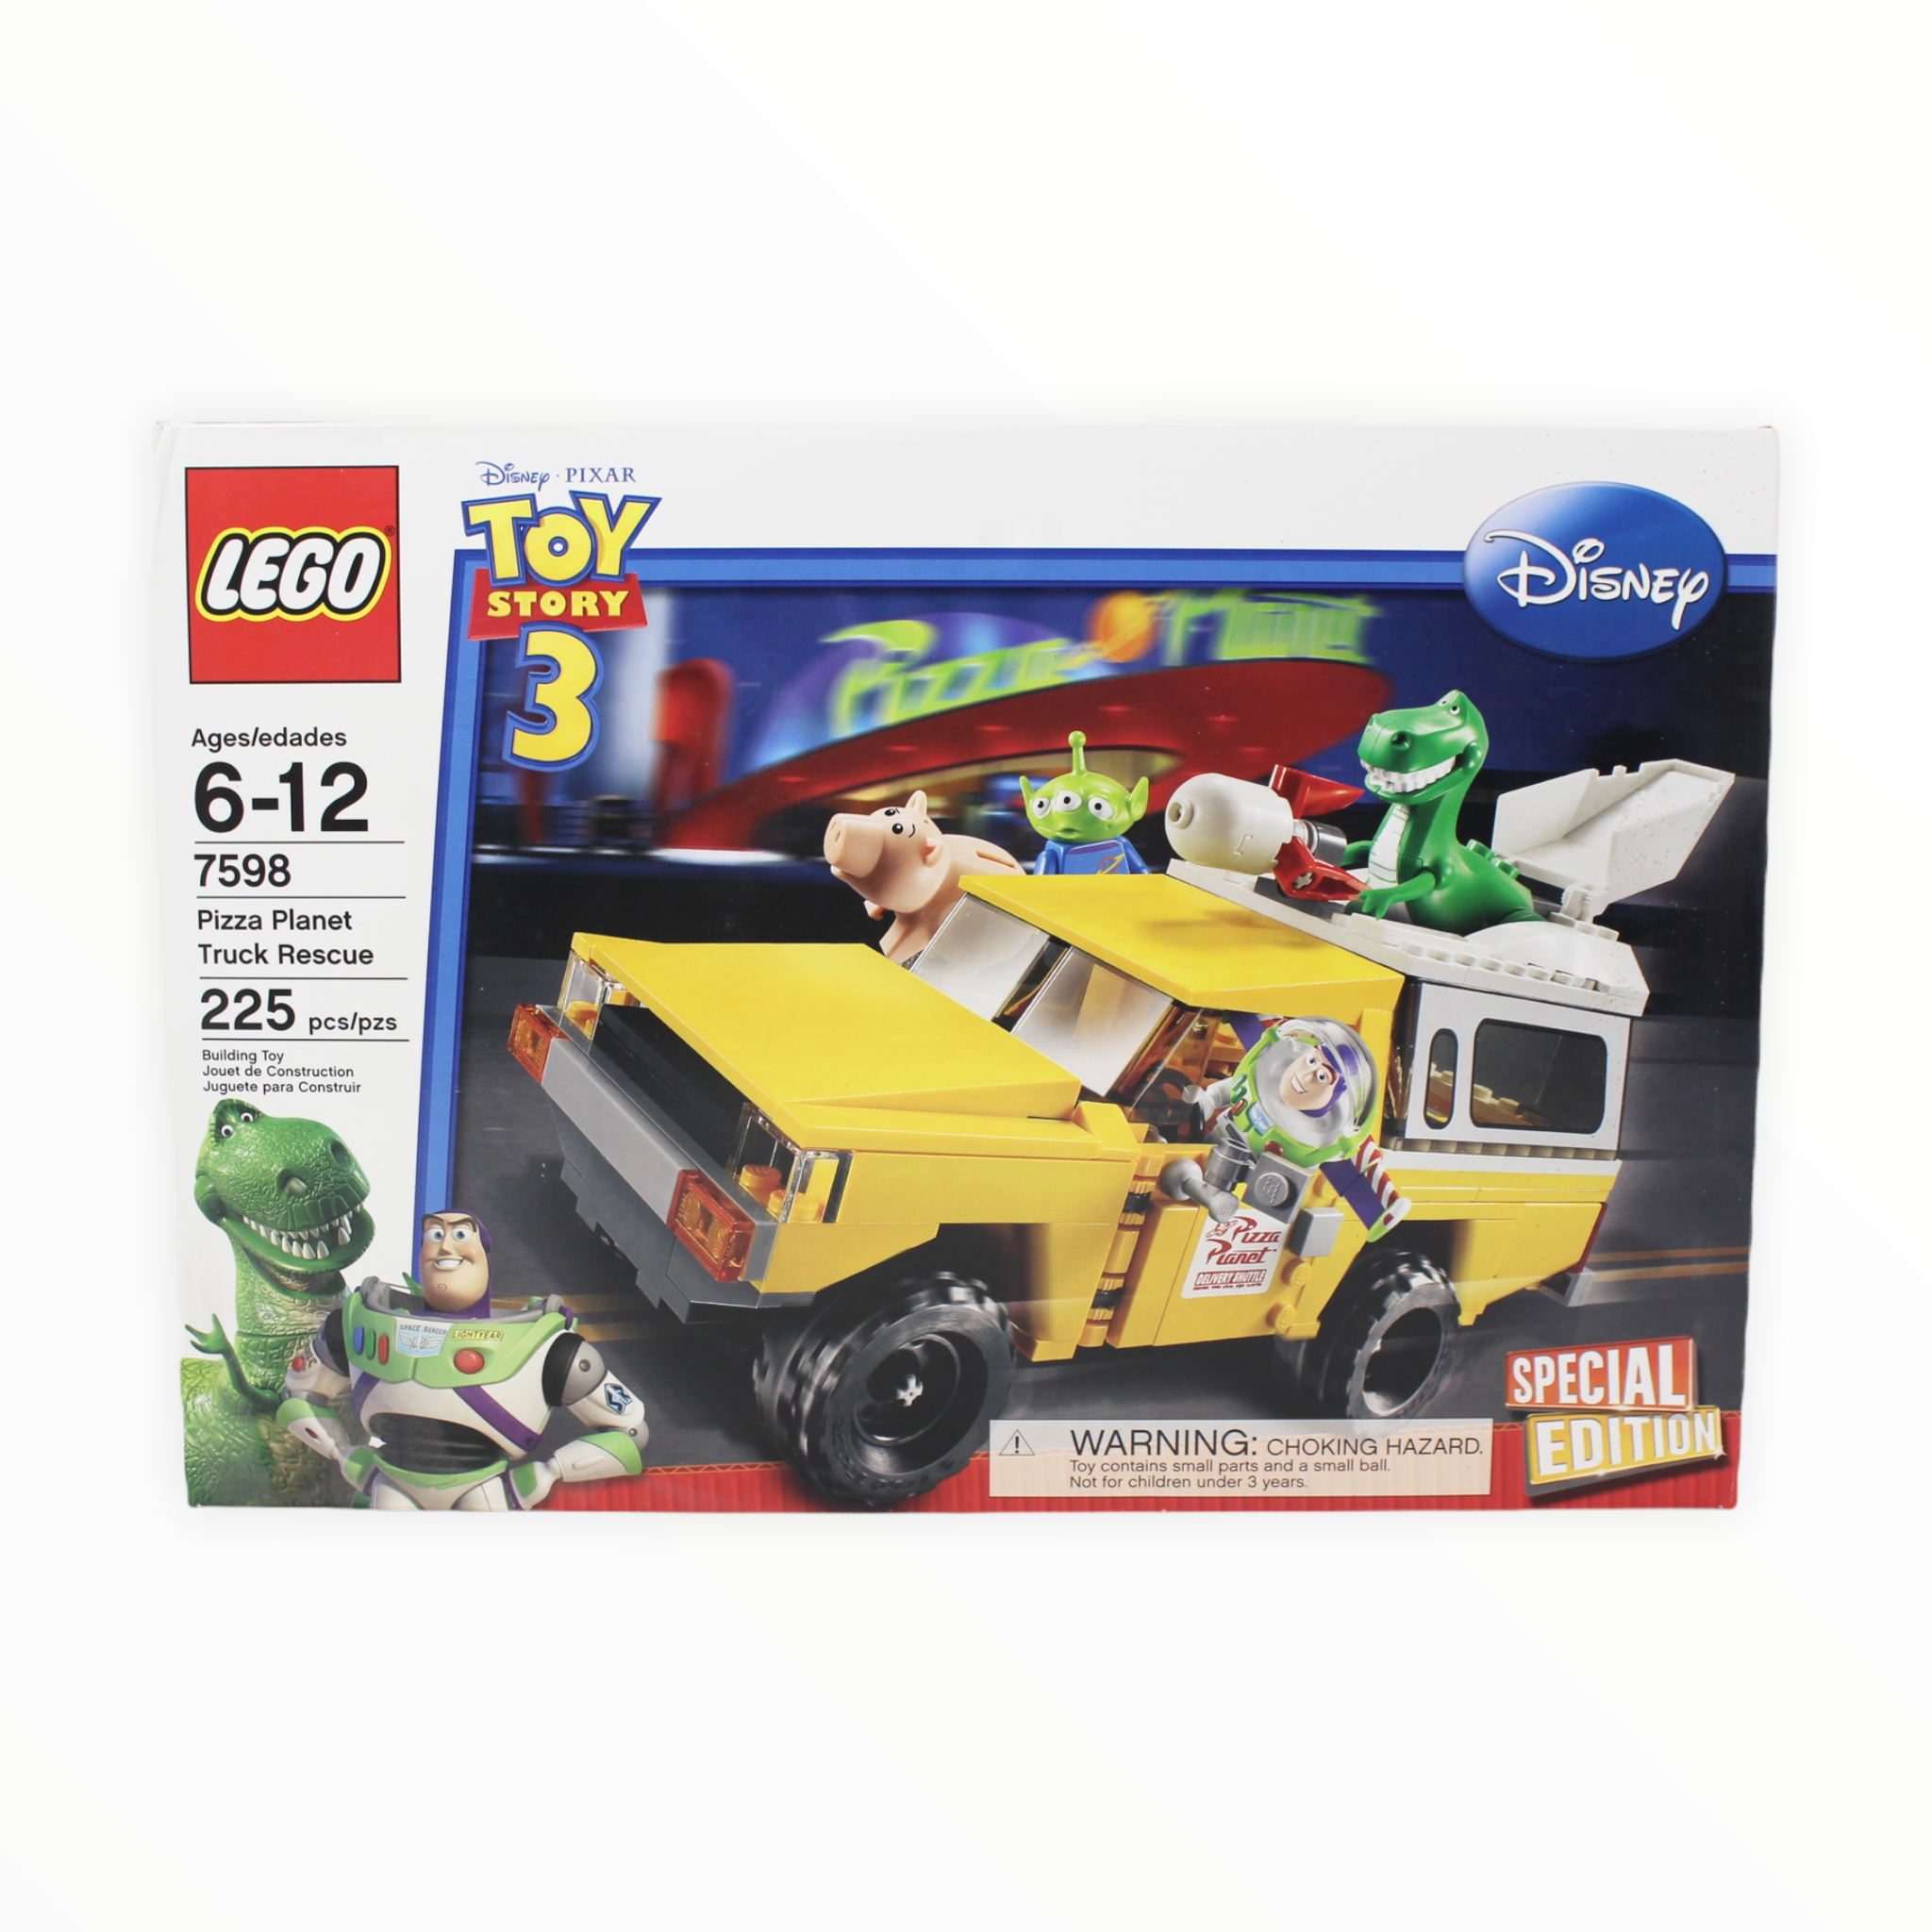 Certified Used Set 7598 Toy Story 3 Pizza Planet Truck Rescue